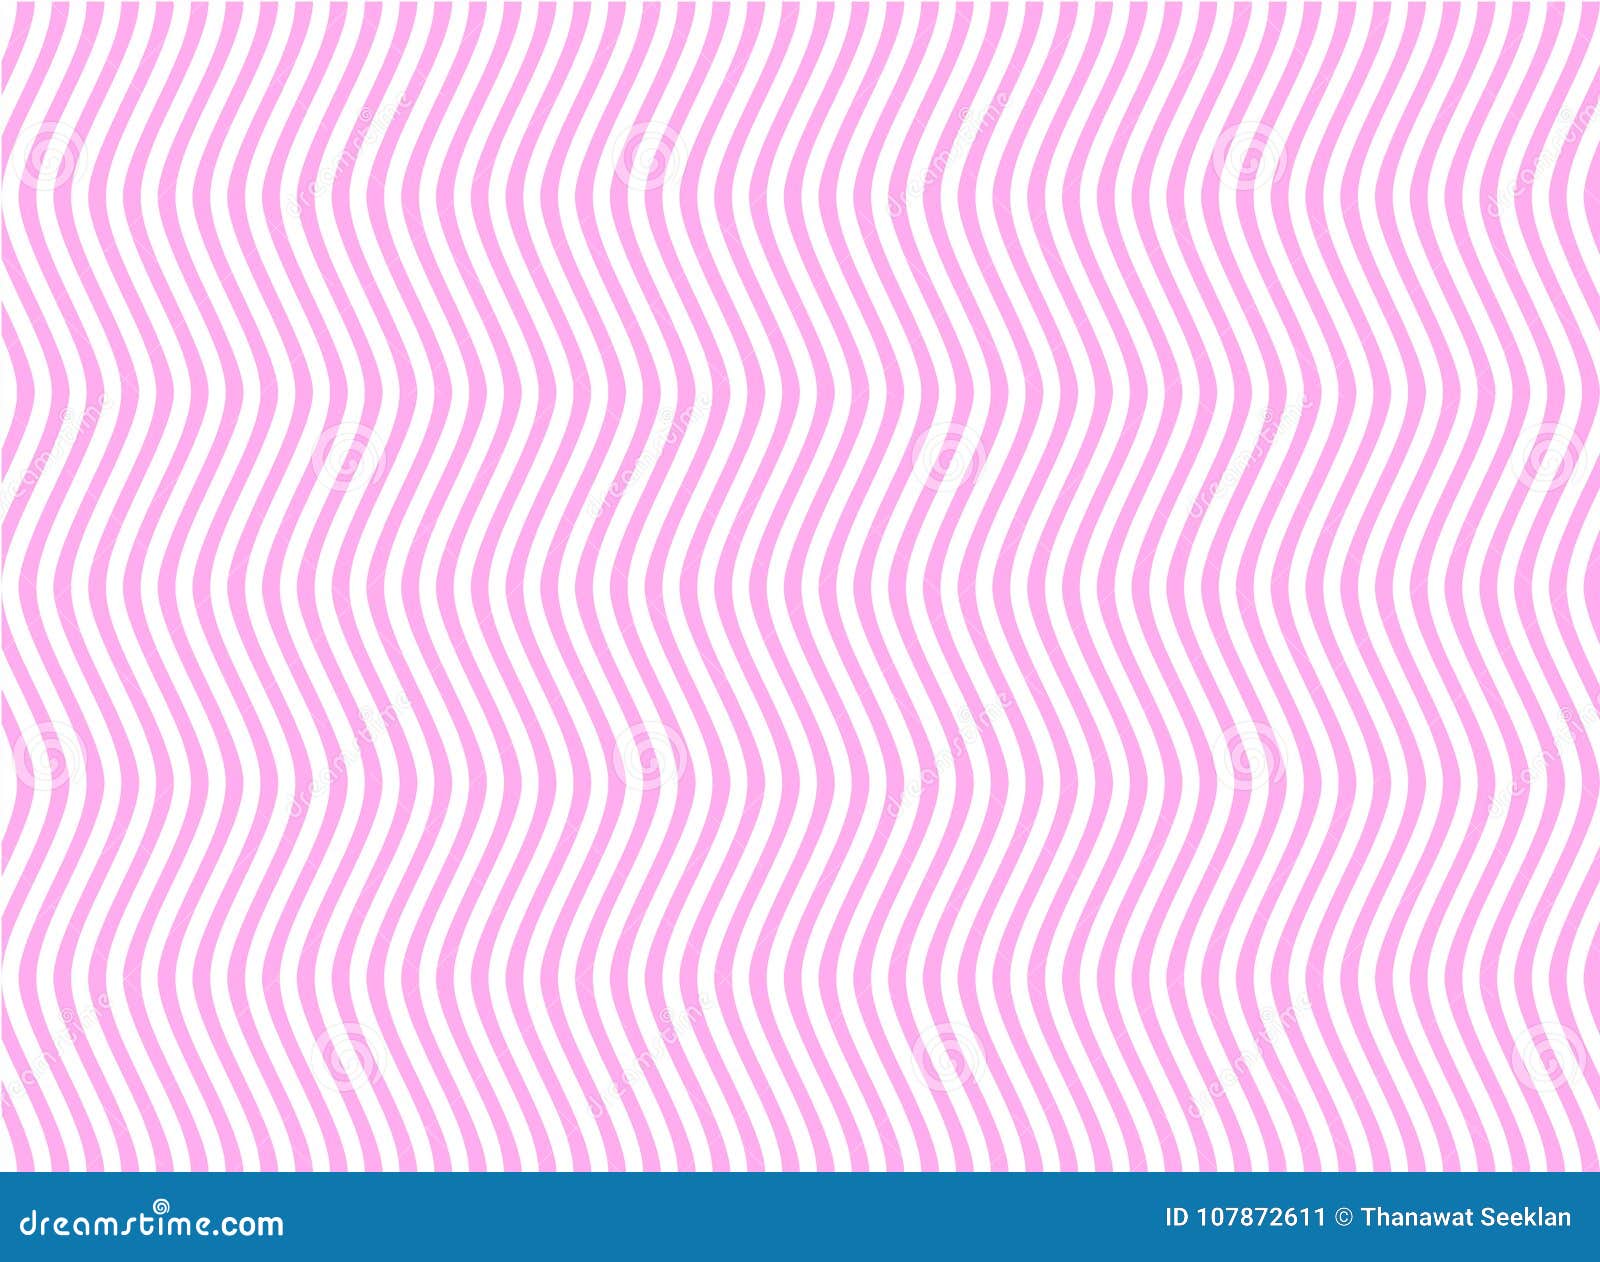 alternation of pink and white stripes